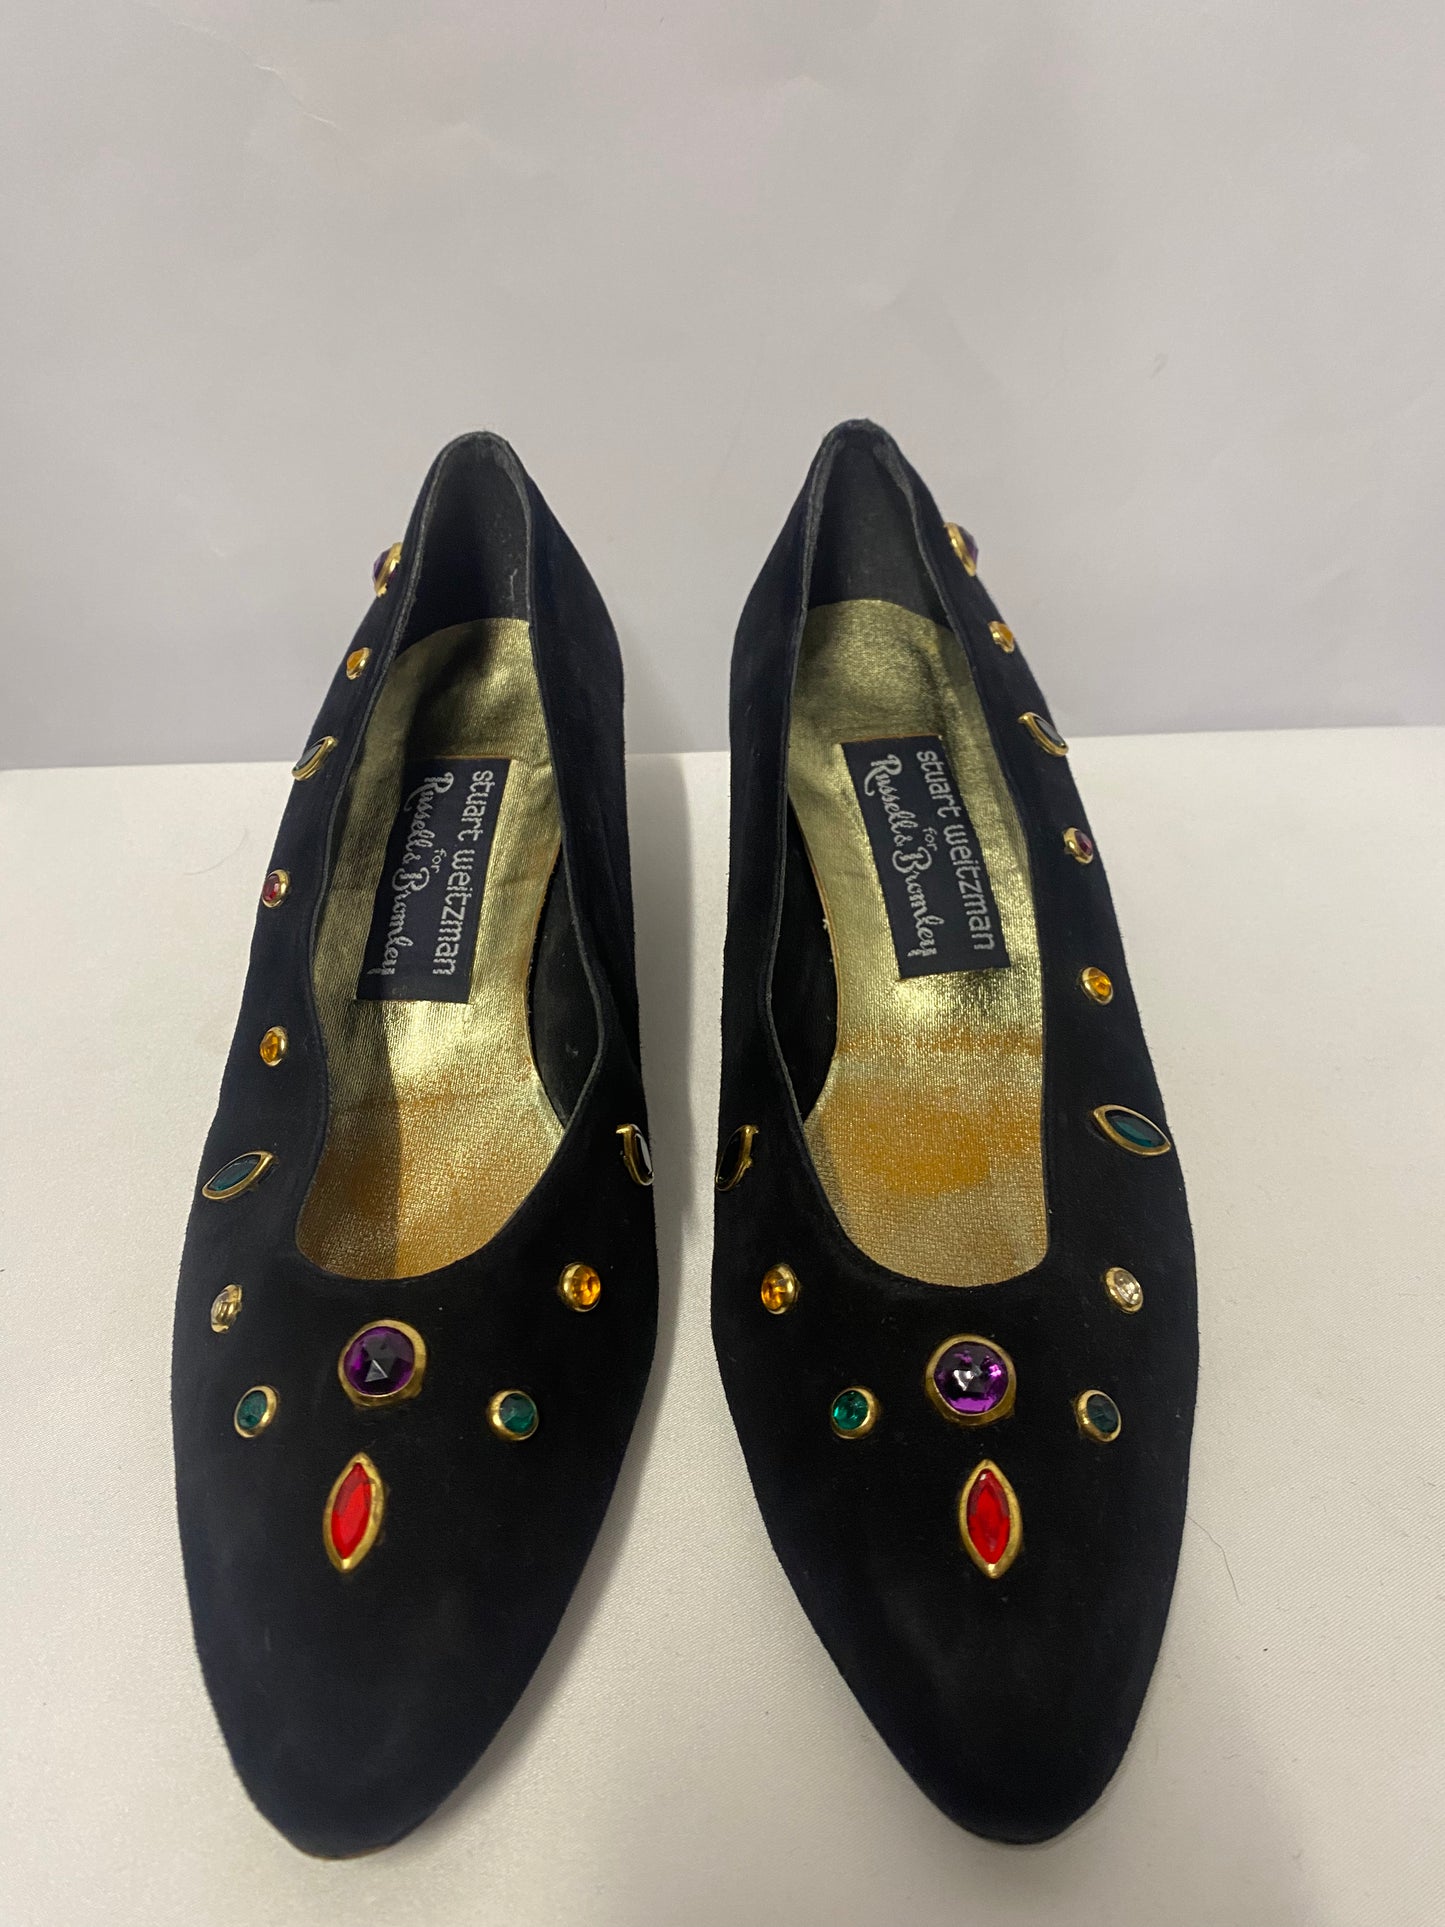 Vintage Stuart Weitzman for Russel and Bromley Black Suede Jewelled Pumps 5 UK